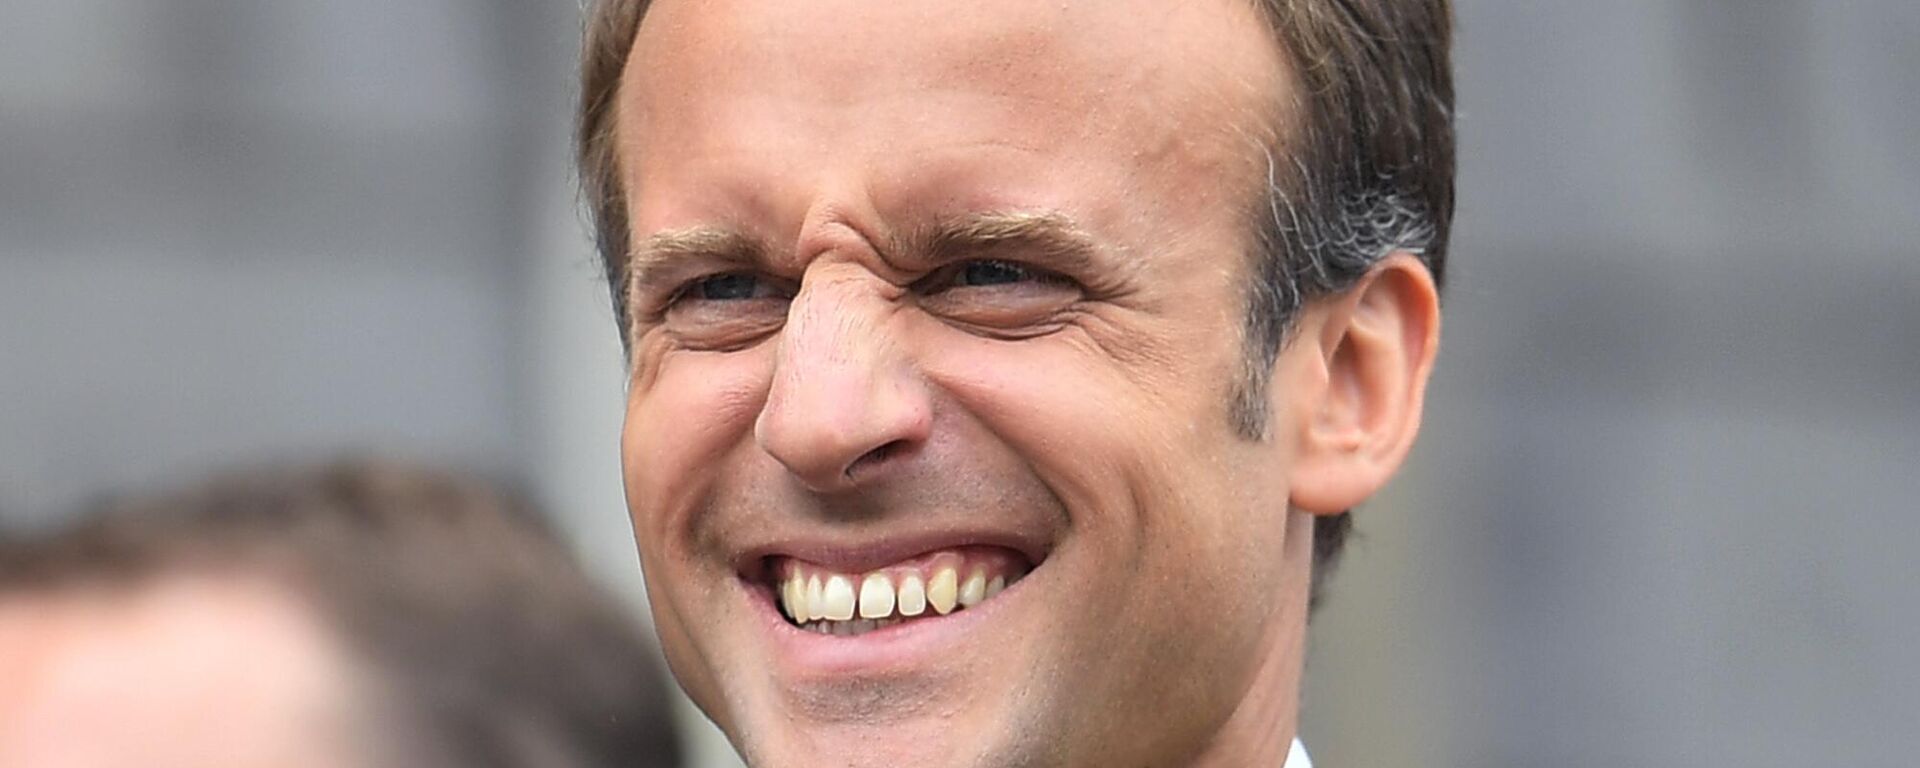 French President Emmanuel Macron grimaces on the town hall balcony on occasion of the Charlemagne Prize awarding in Aachen, Germany, Thursday, May 10, 2018 - Sputnik International, 1920, 29.04.2024